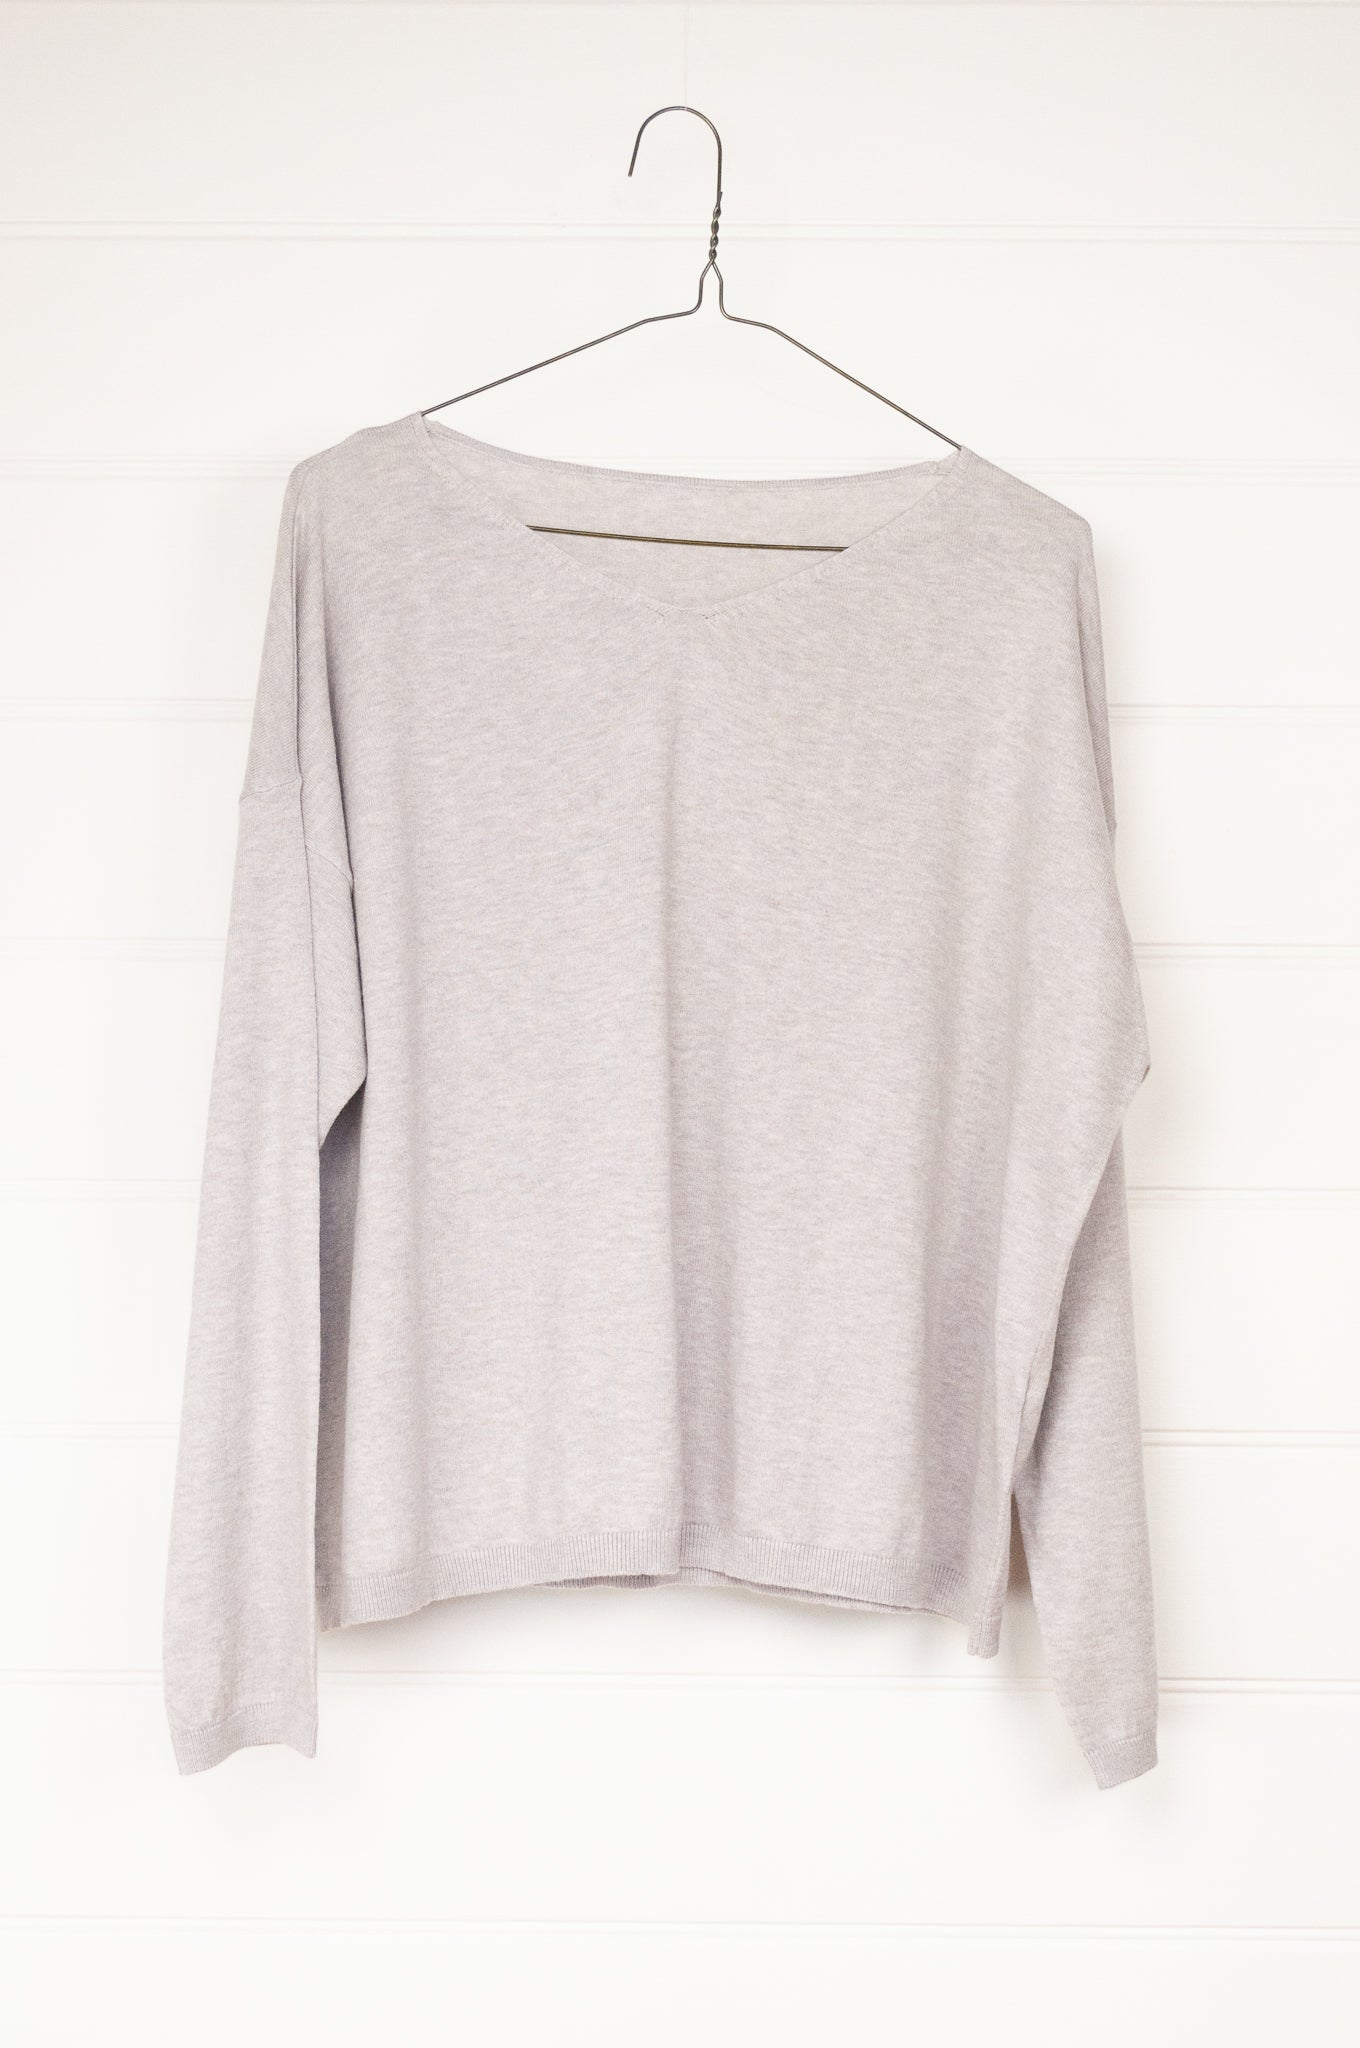 One size slouchy V-neck sweater in cashmere cotton, light ash grey. Ethically made in Nepal.